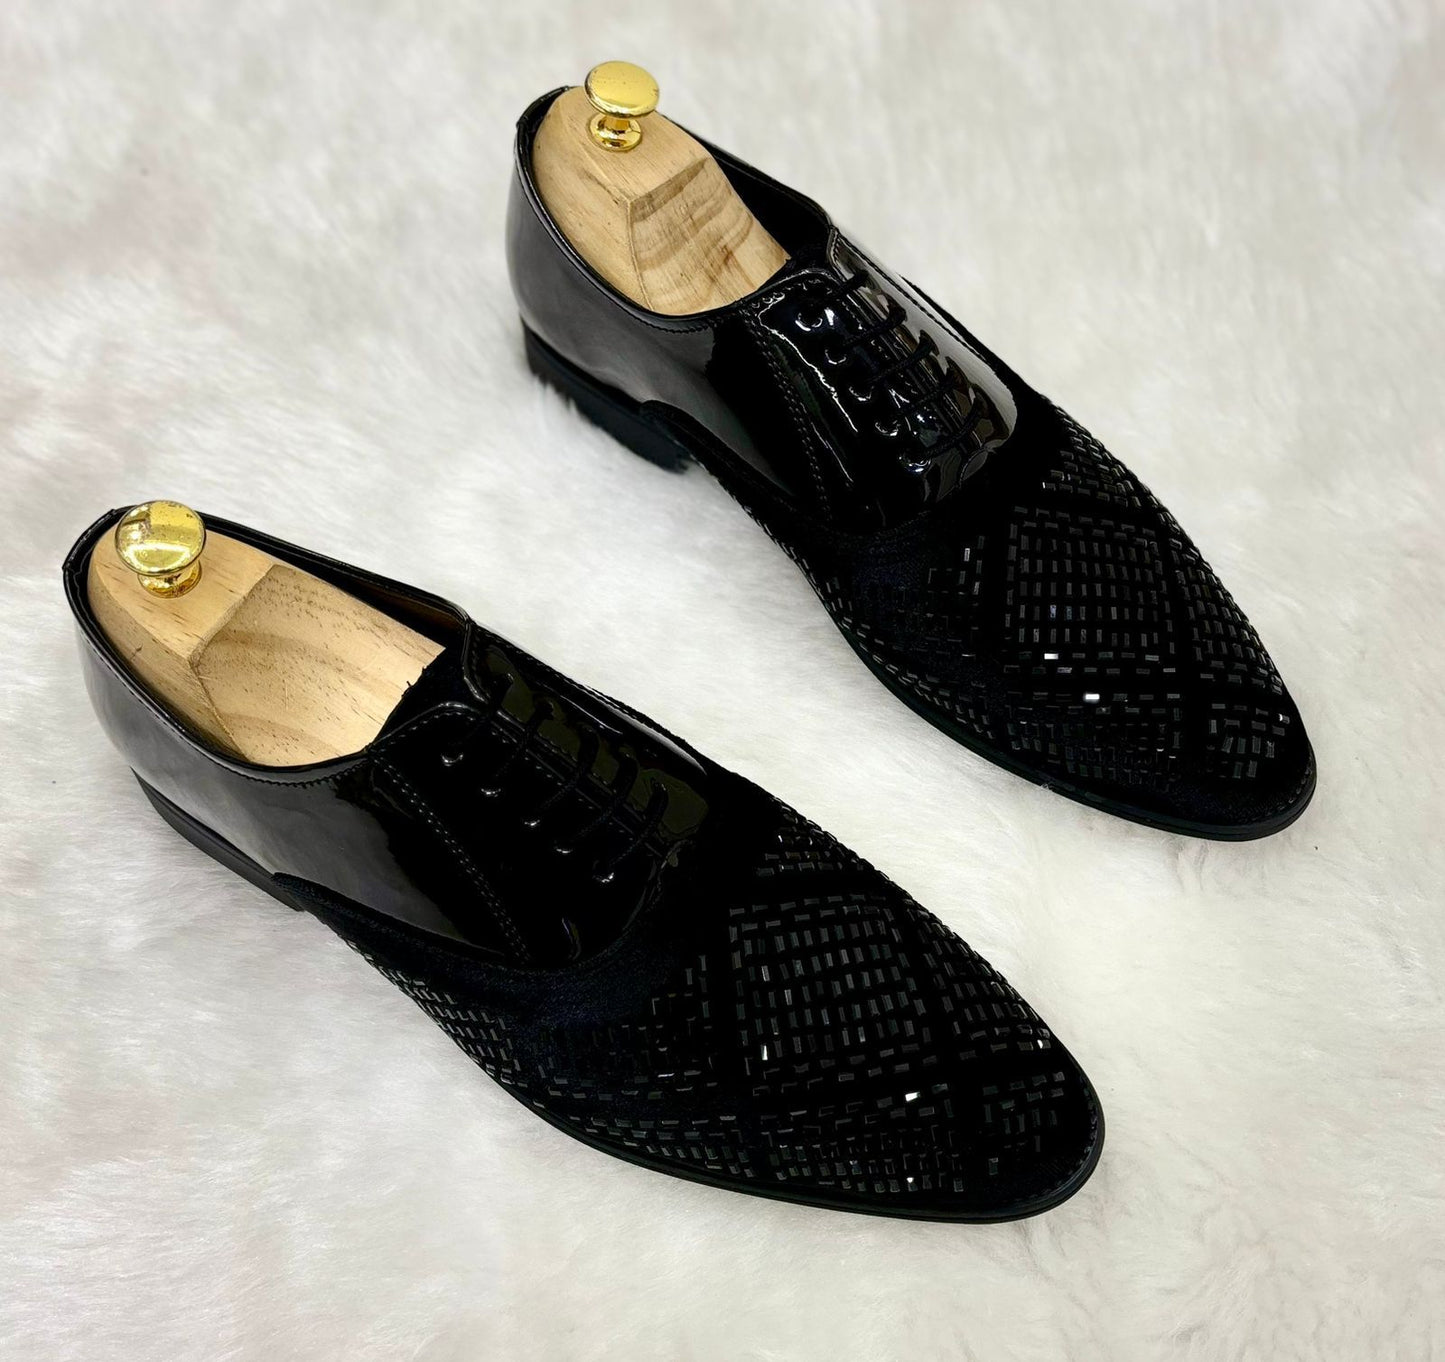 Jack Marc Fashion Rhinestone Lace-up Shoes for Men Party and Casual Wear